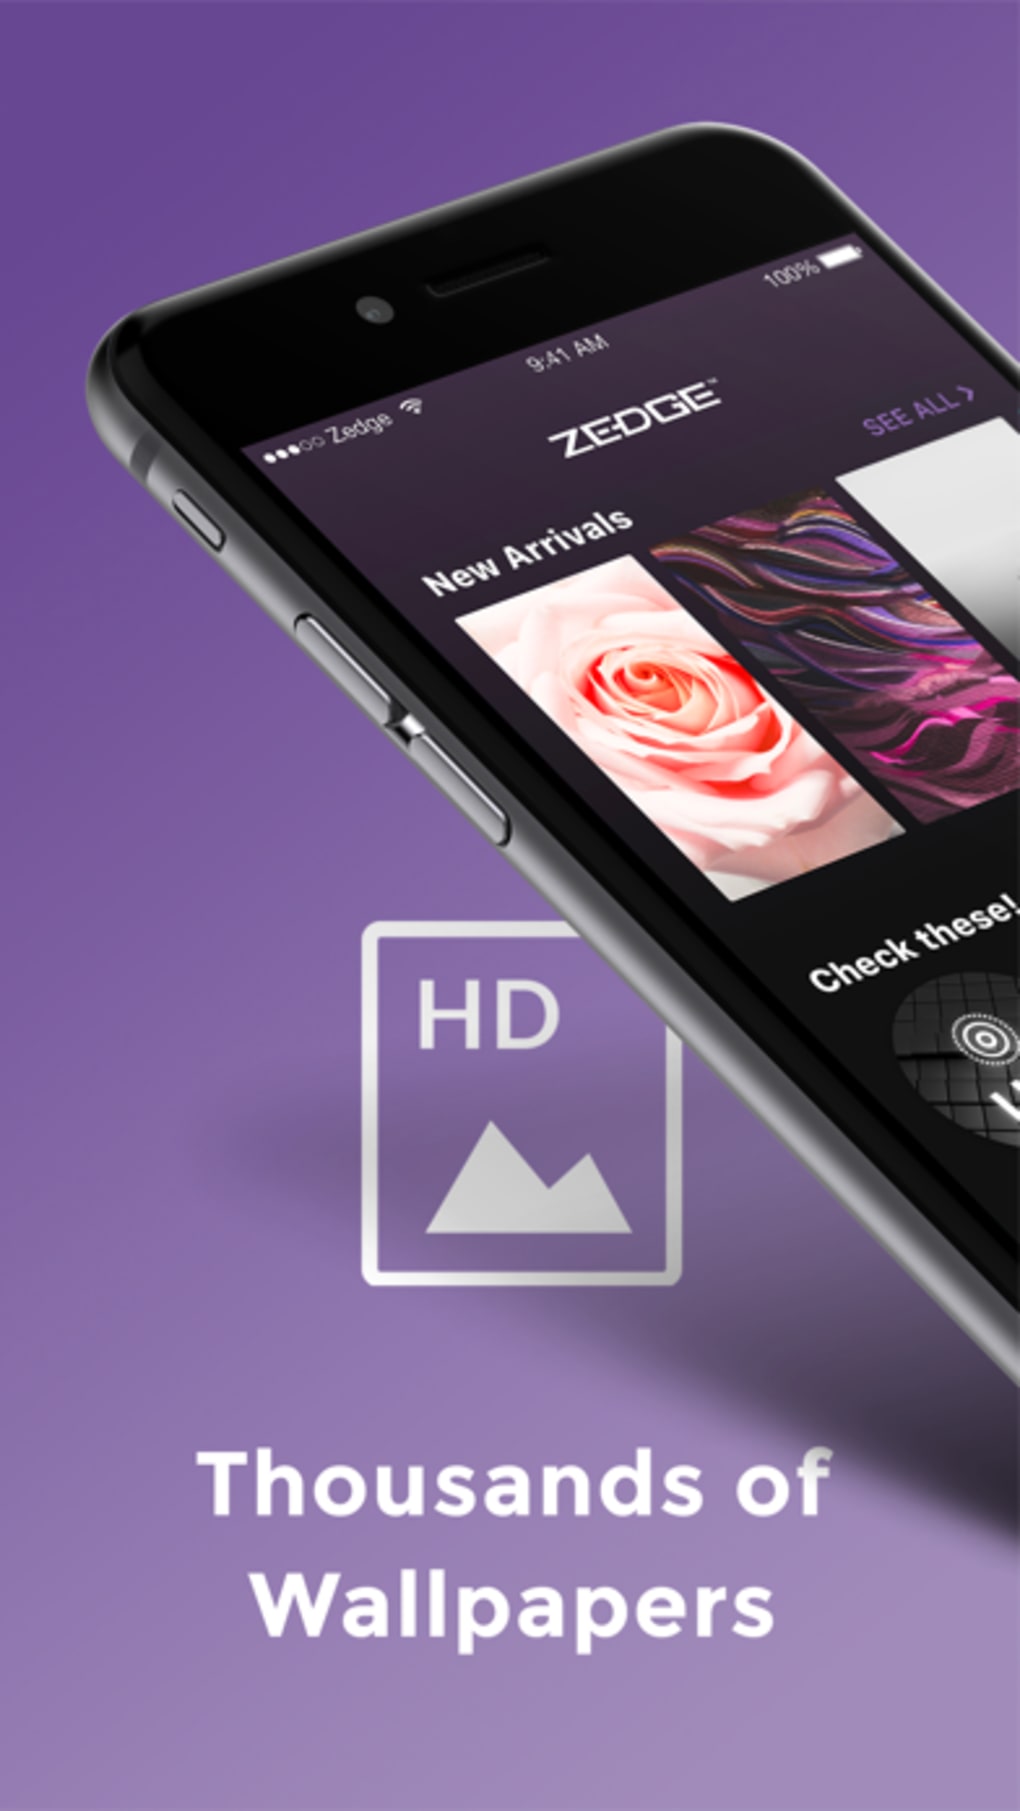 Zedge Wallpapers For Iphone Download